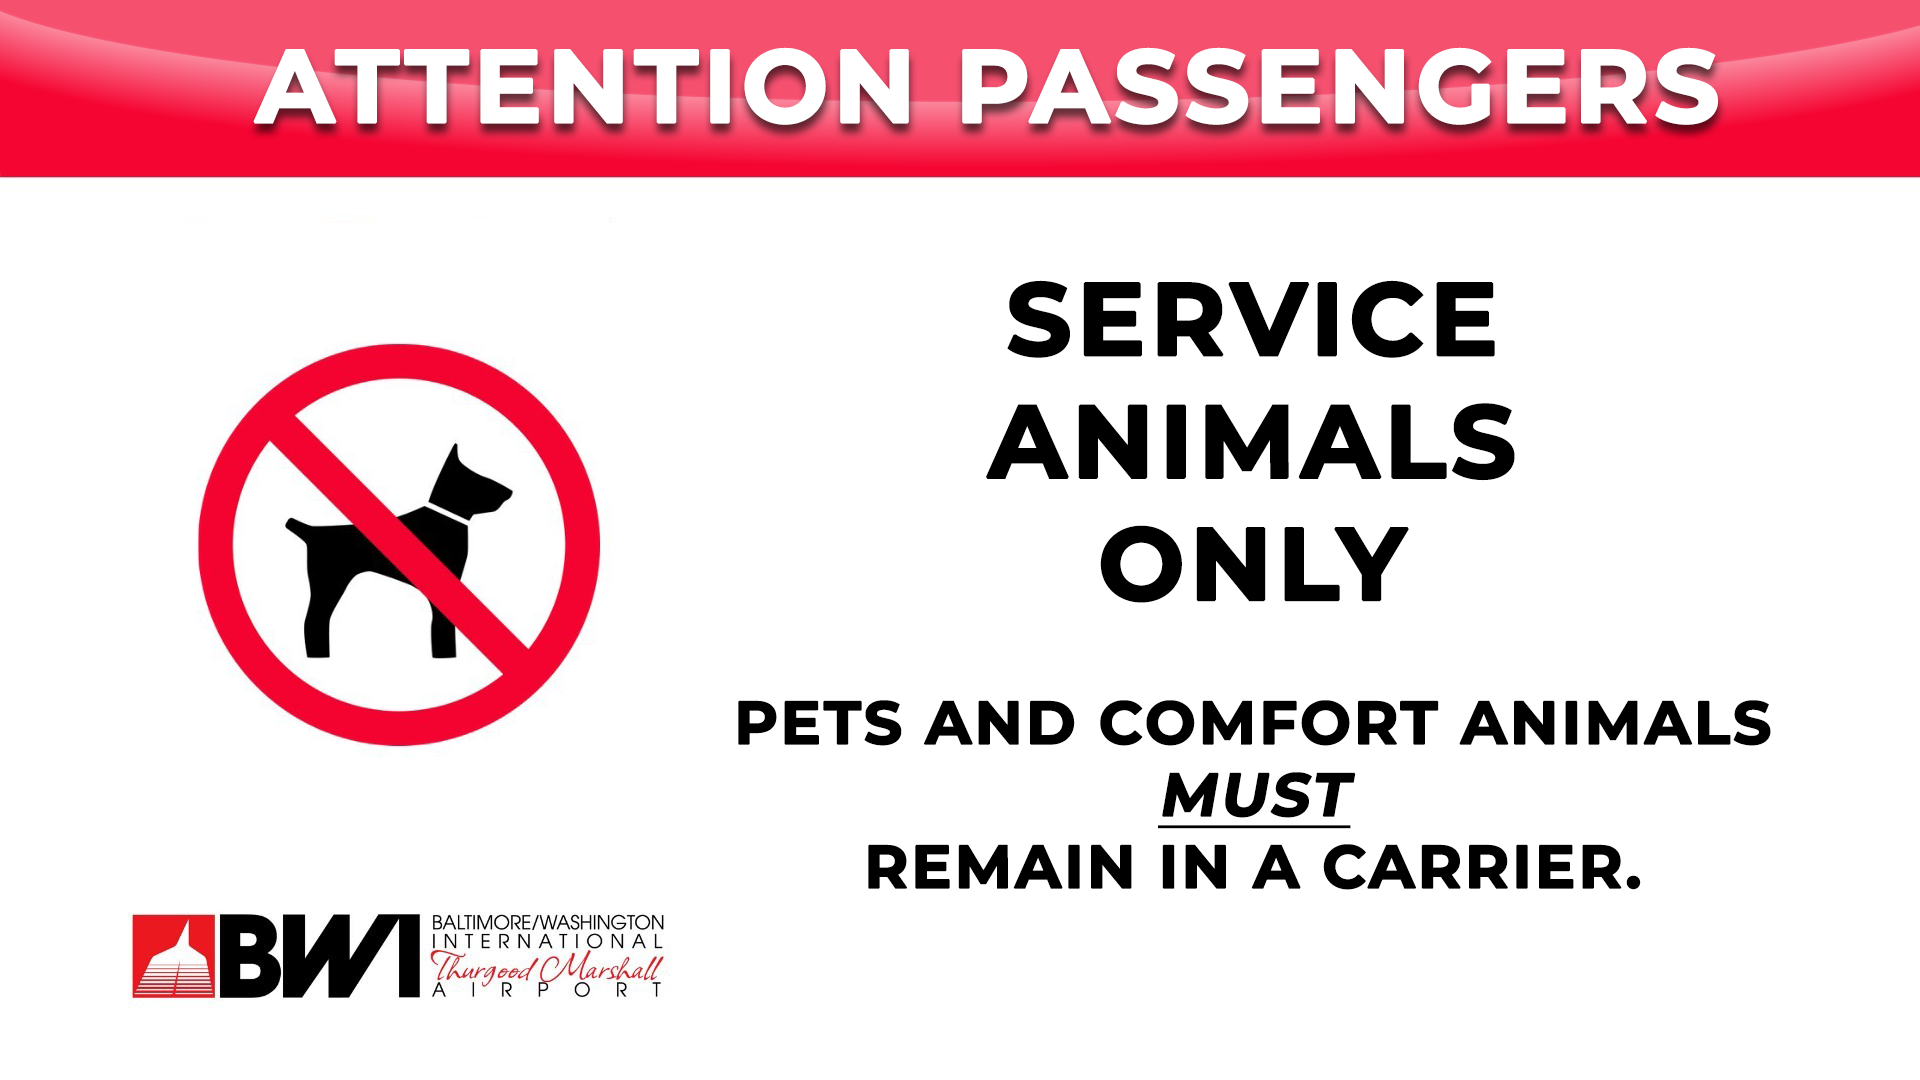 Graphic noting non-service animals are to be crated at BWI Marshall Airport